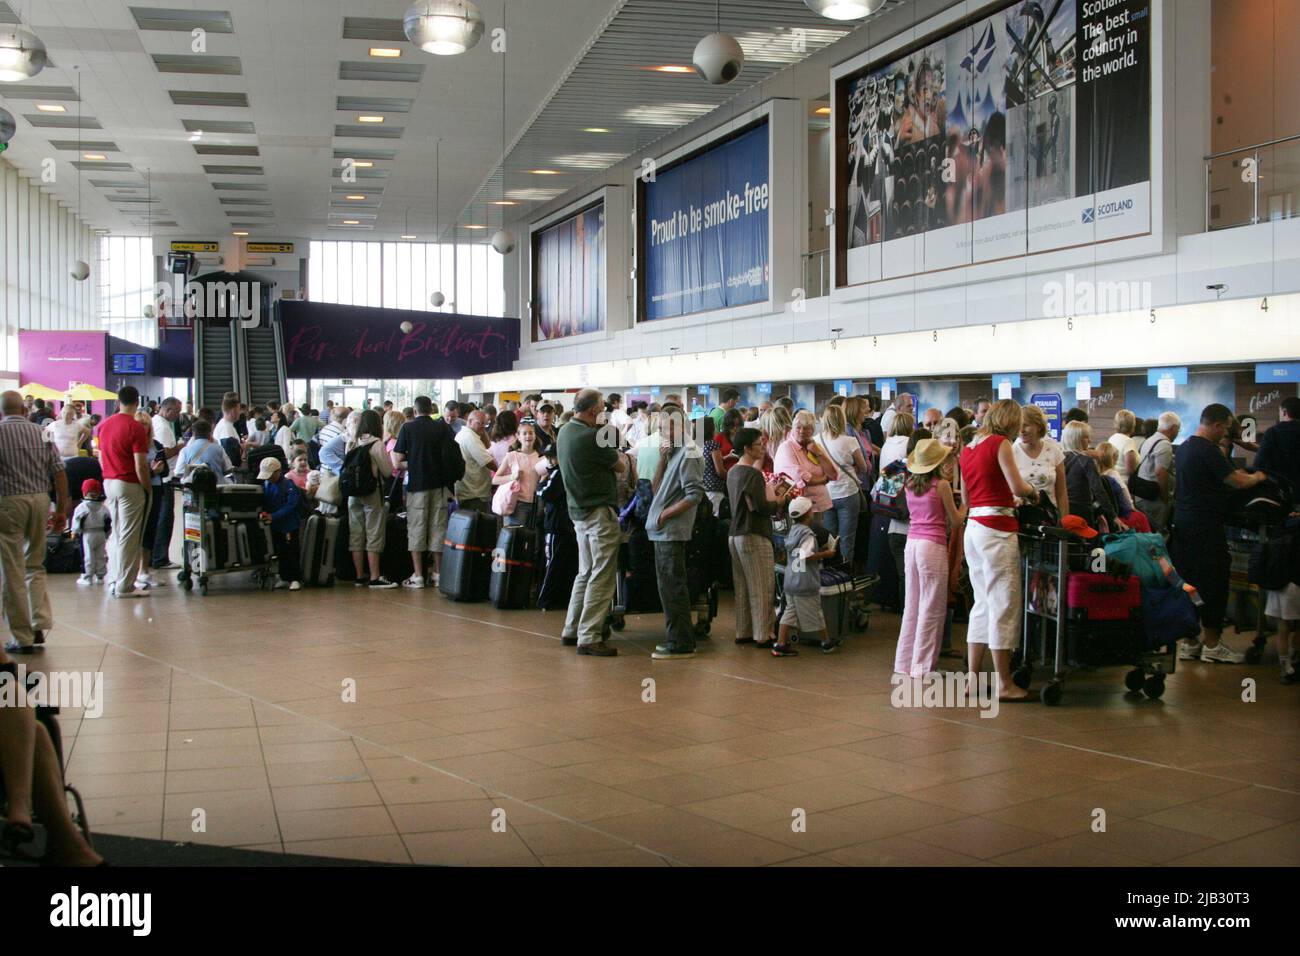 Glasgow Prestwick Airport, Prestwick, Ayrshire, Scotland, UK. Re branded as Pure Dead Brilliant. Photo shows crowds of holidaymakers in the terminal building Stock Photo